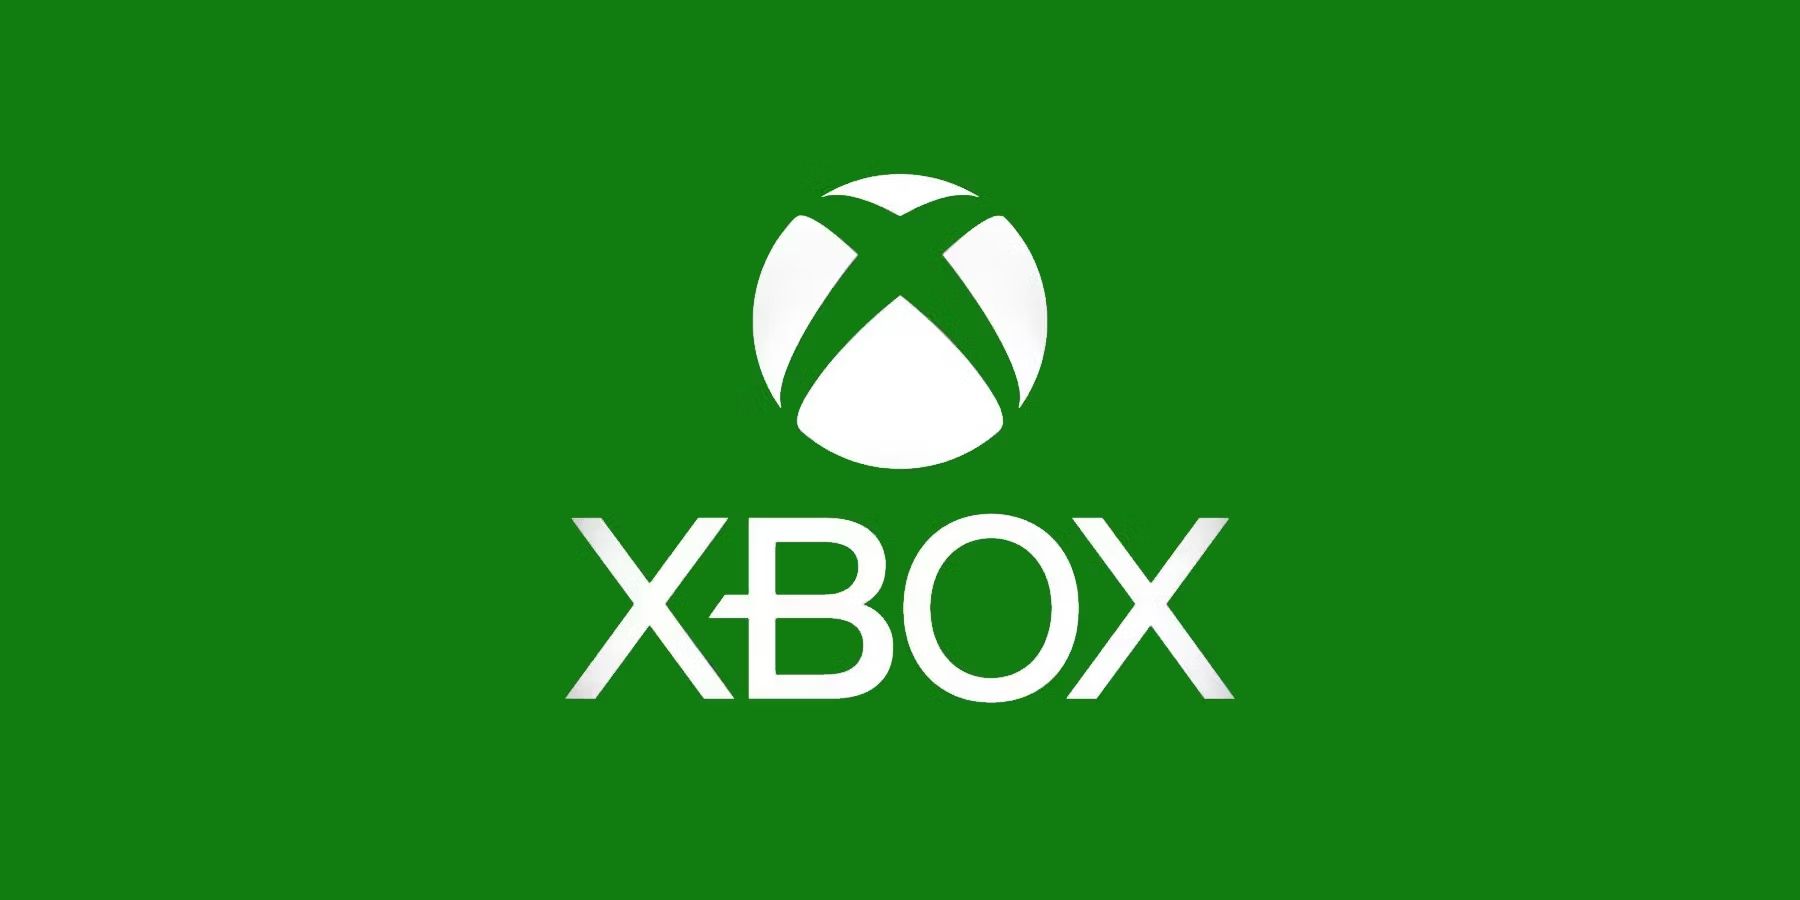 Microsoft Xbox leak: games, devices, plans exposed